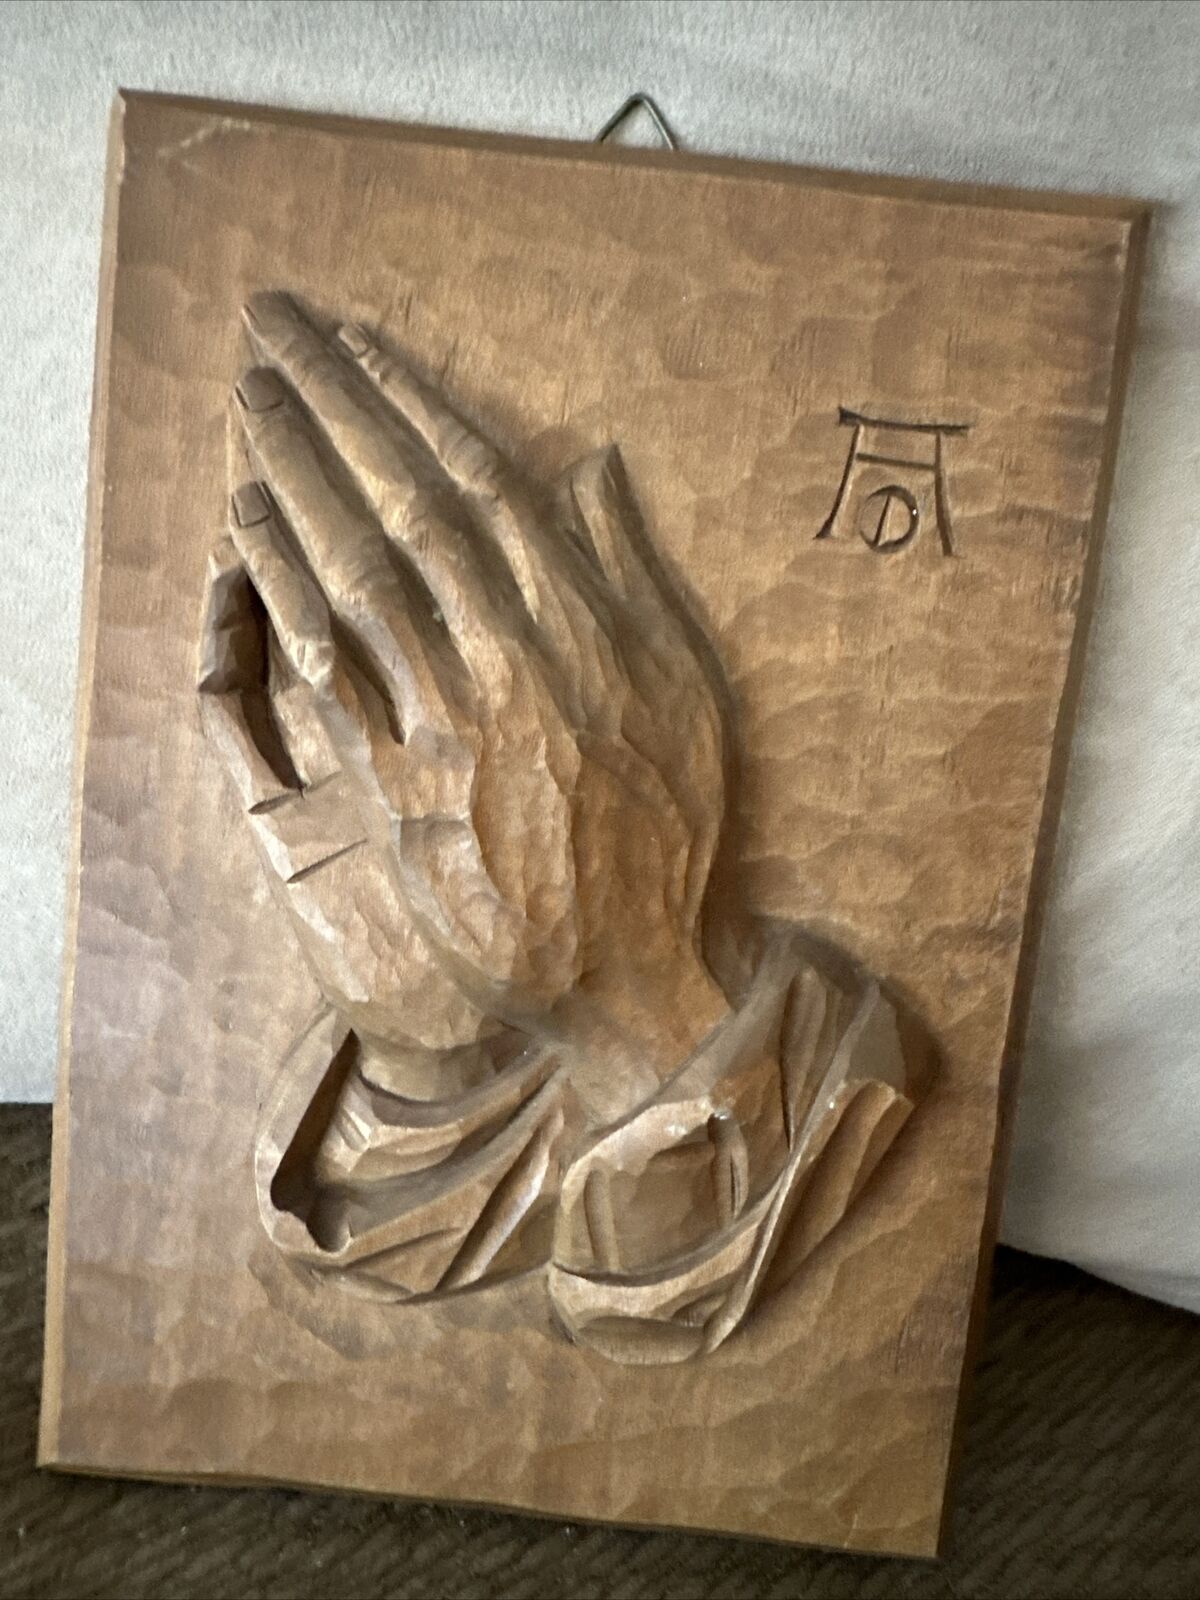 AWESOME VINTAGE RELIGOUS WALL PLAQUE WITH PRAYING HANDS BAS RELIEF CARVING